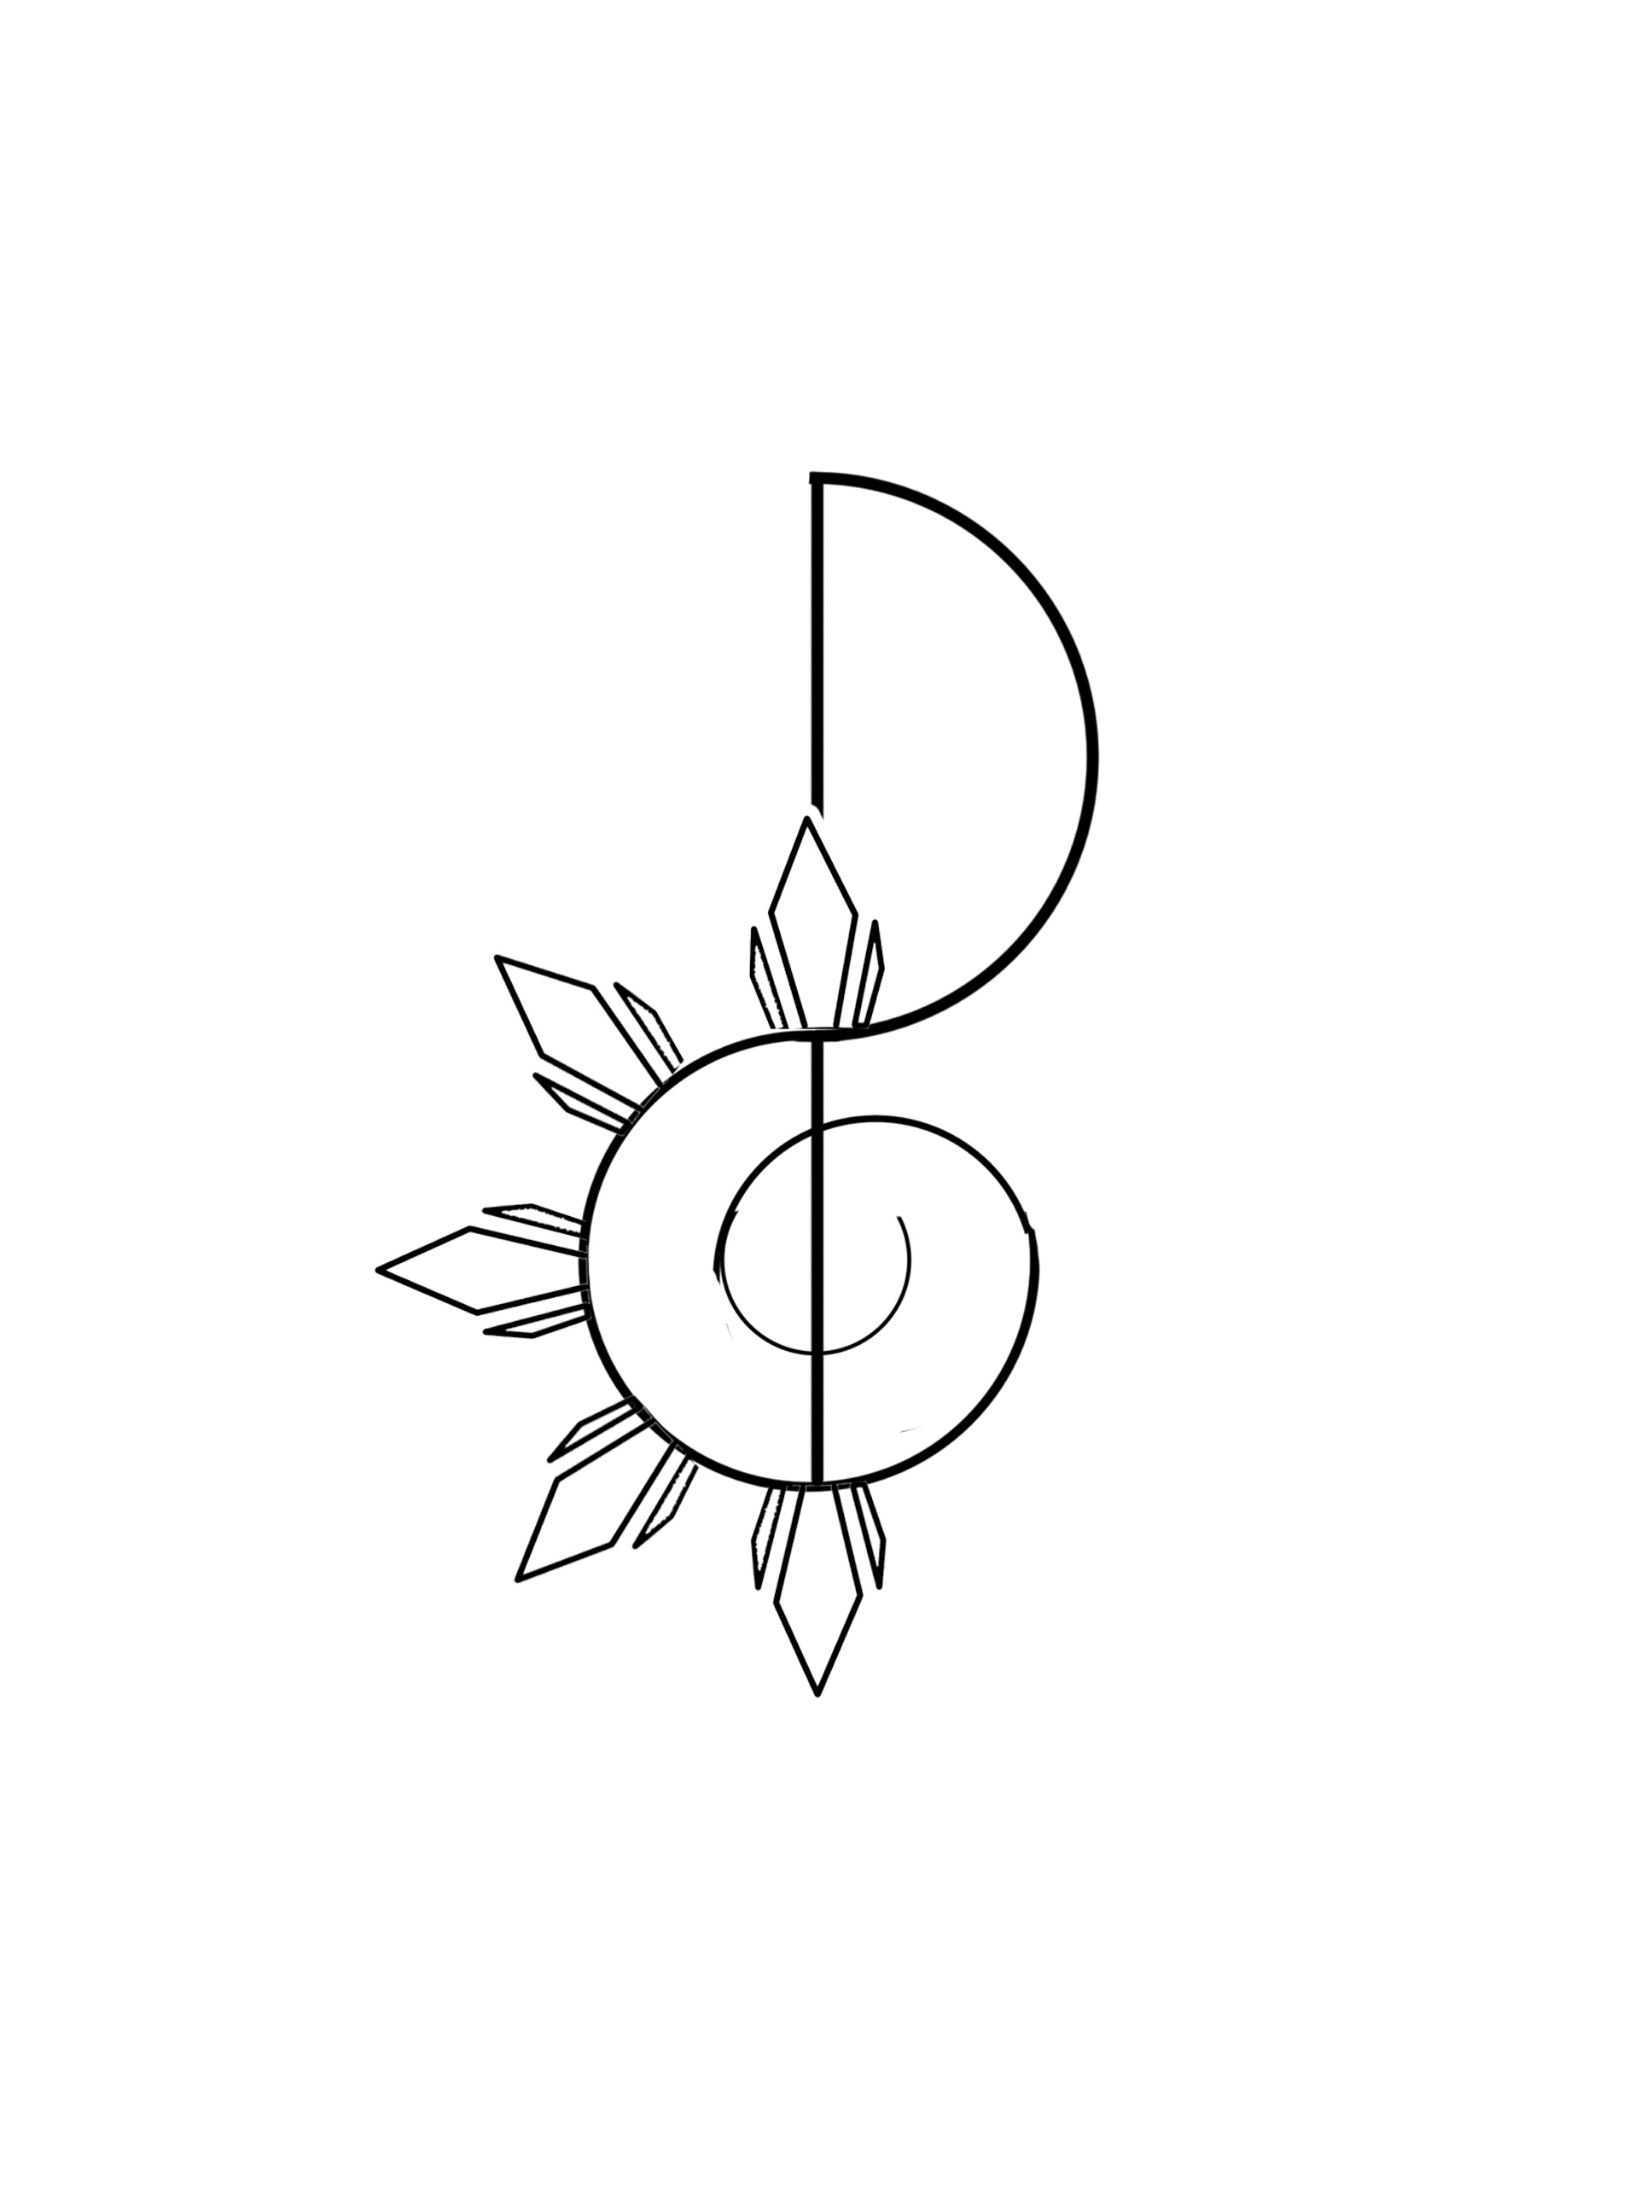 Treble Clef Outline Images & Pictures - Becuo